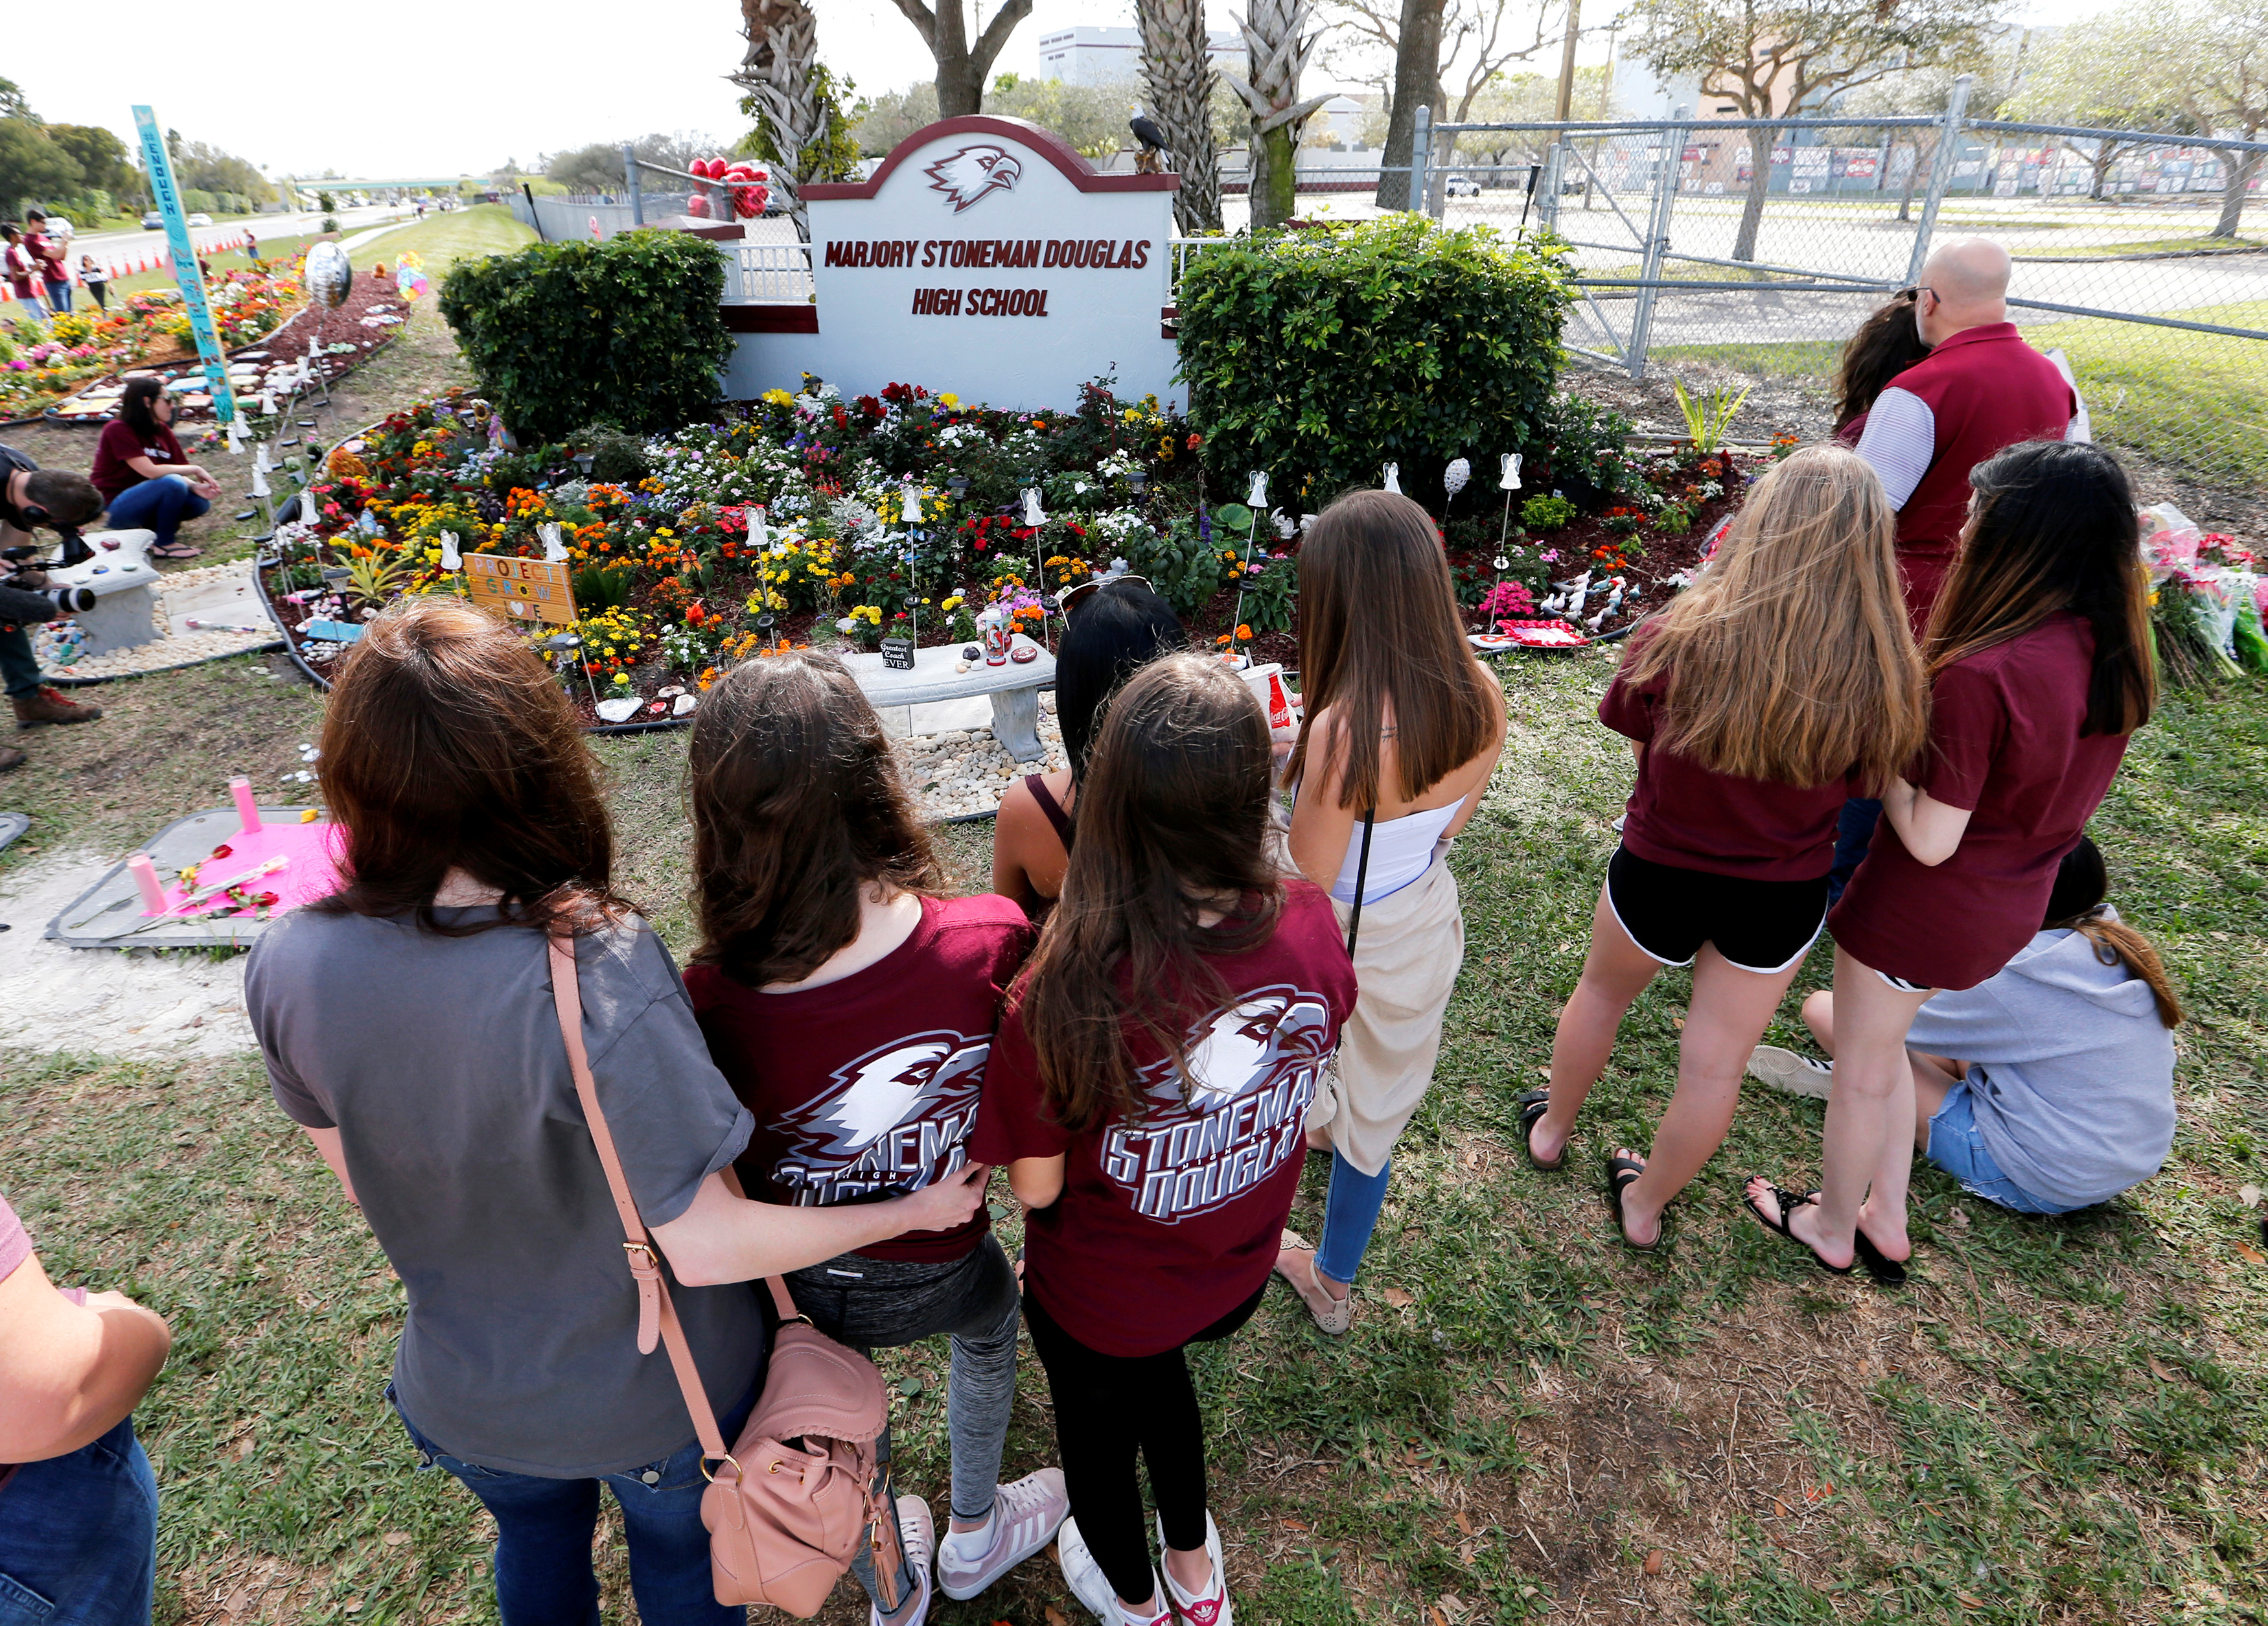 A memorial is viewed by parents and students on campus at a memorial on the one year anniversary of the shooting which claimed 17 lives at Marjory Stoneman Douglas High School in Parkland